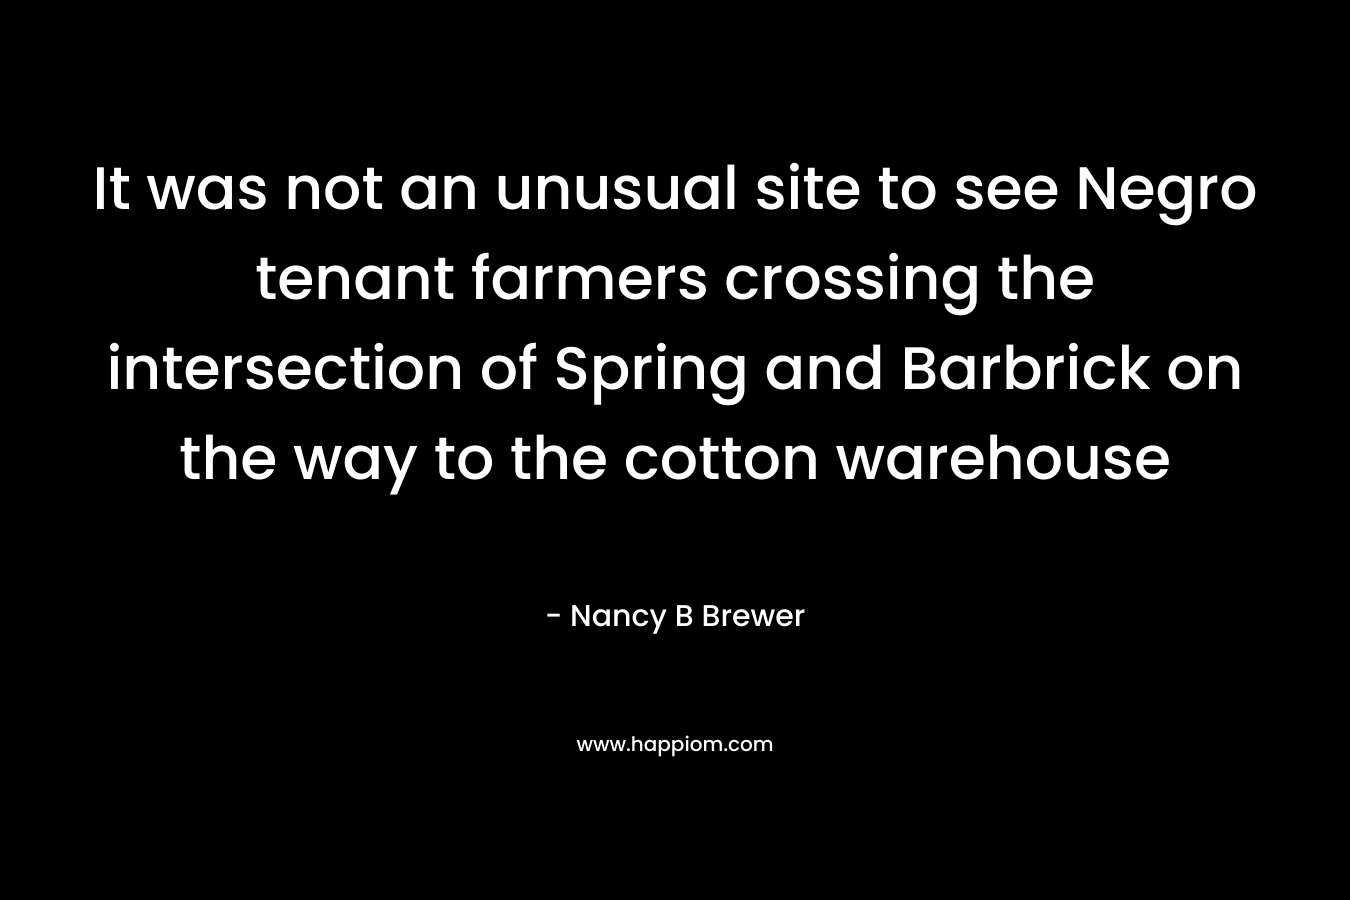 It was not an unusual site to see Negro tenant farmers crossing the intersection of Spring and Barbrick on the way to the cotton warehouse – Nancy B Brewer